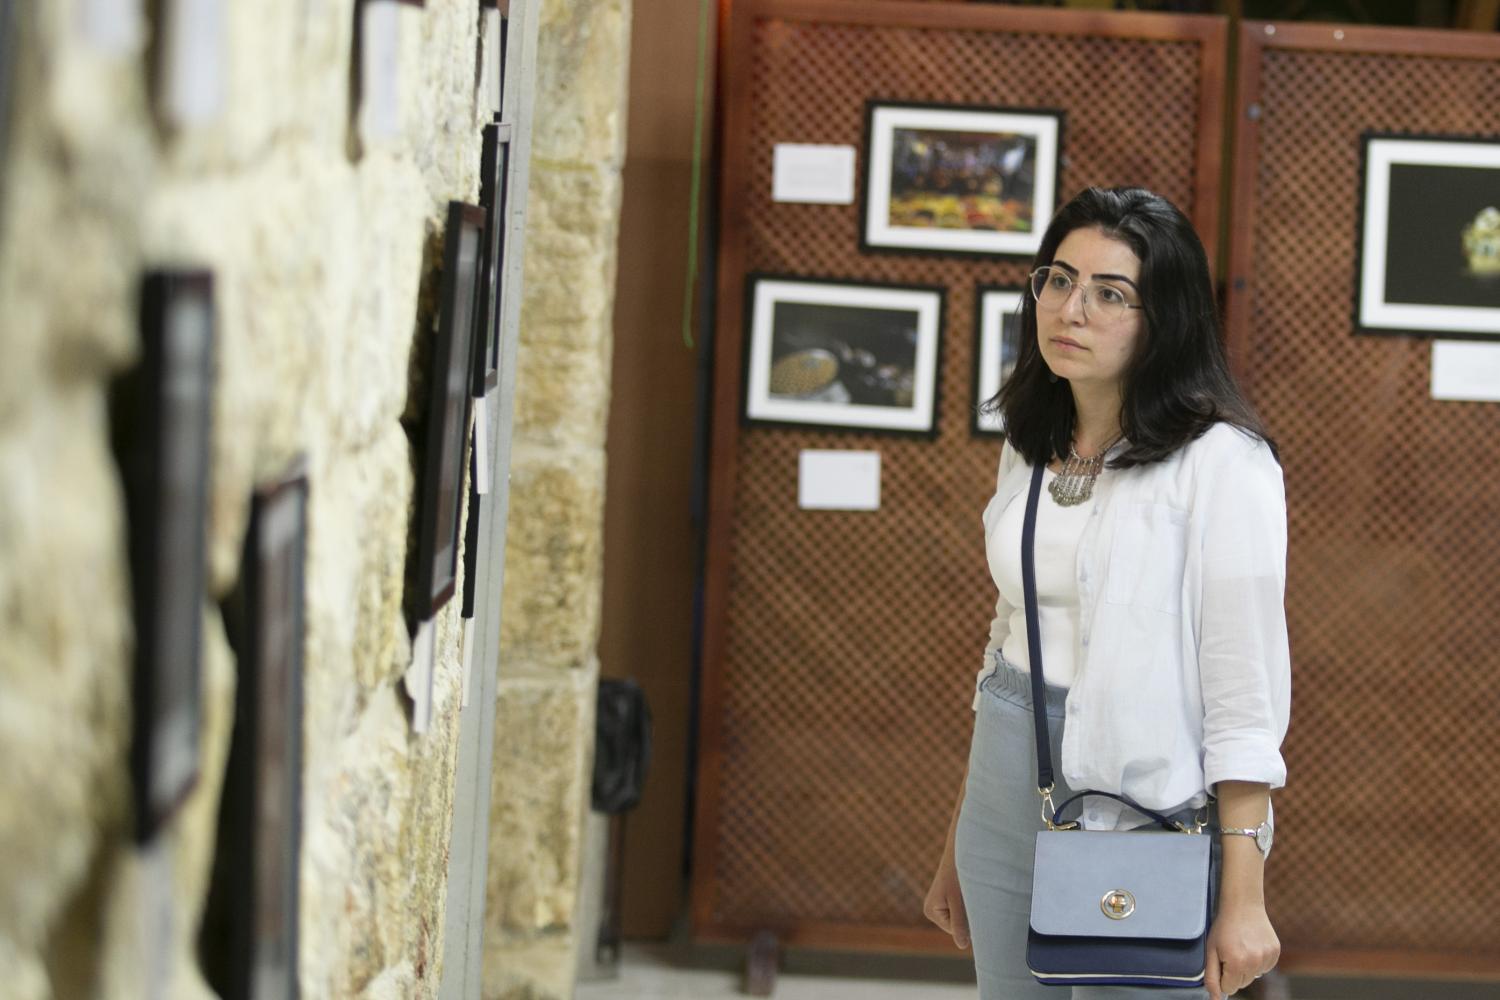 A visitor looks at photos of Middle Eastern markets at the African Community Society in the Old City of Jerusalem